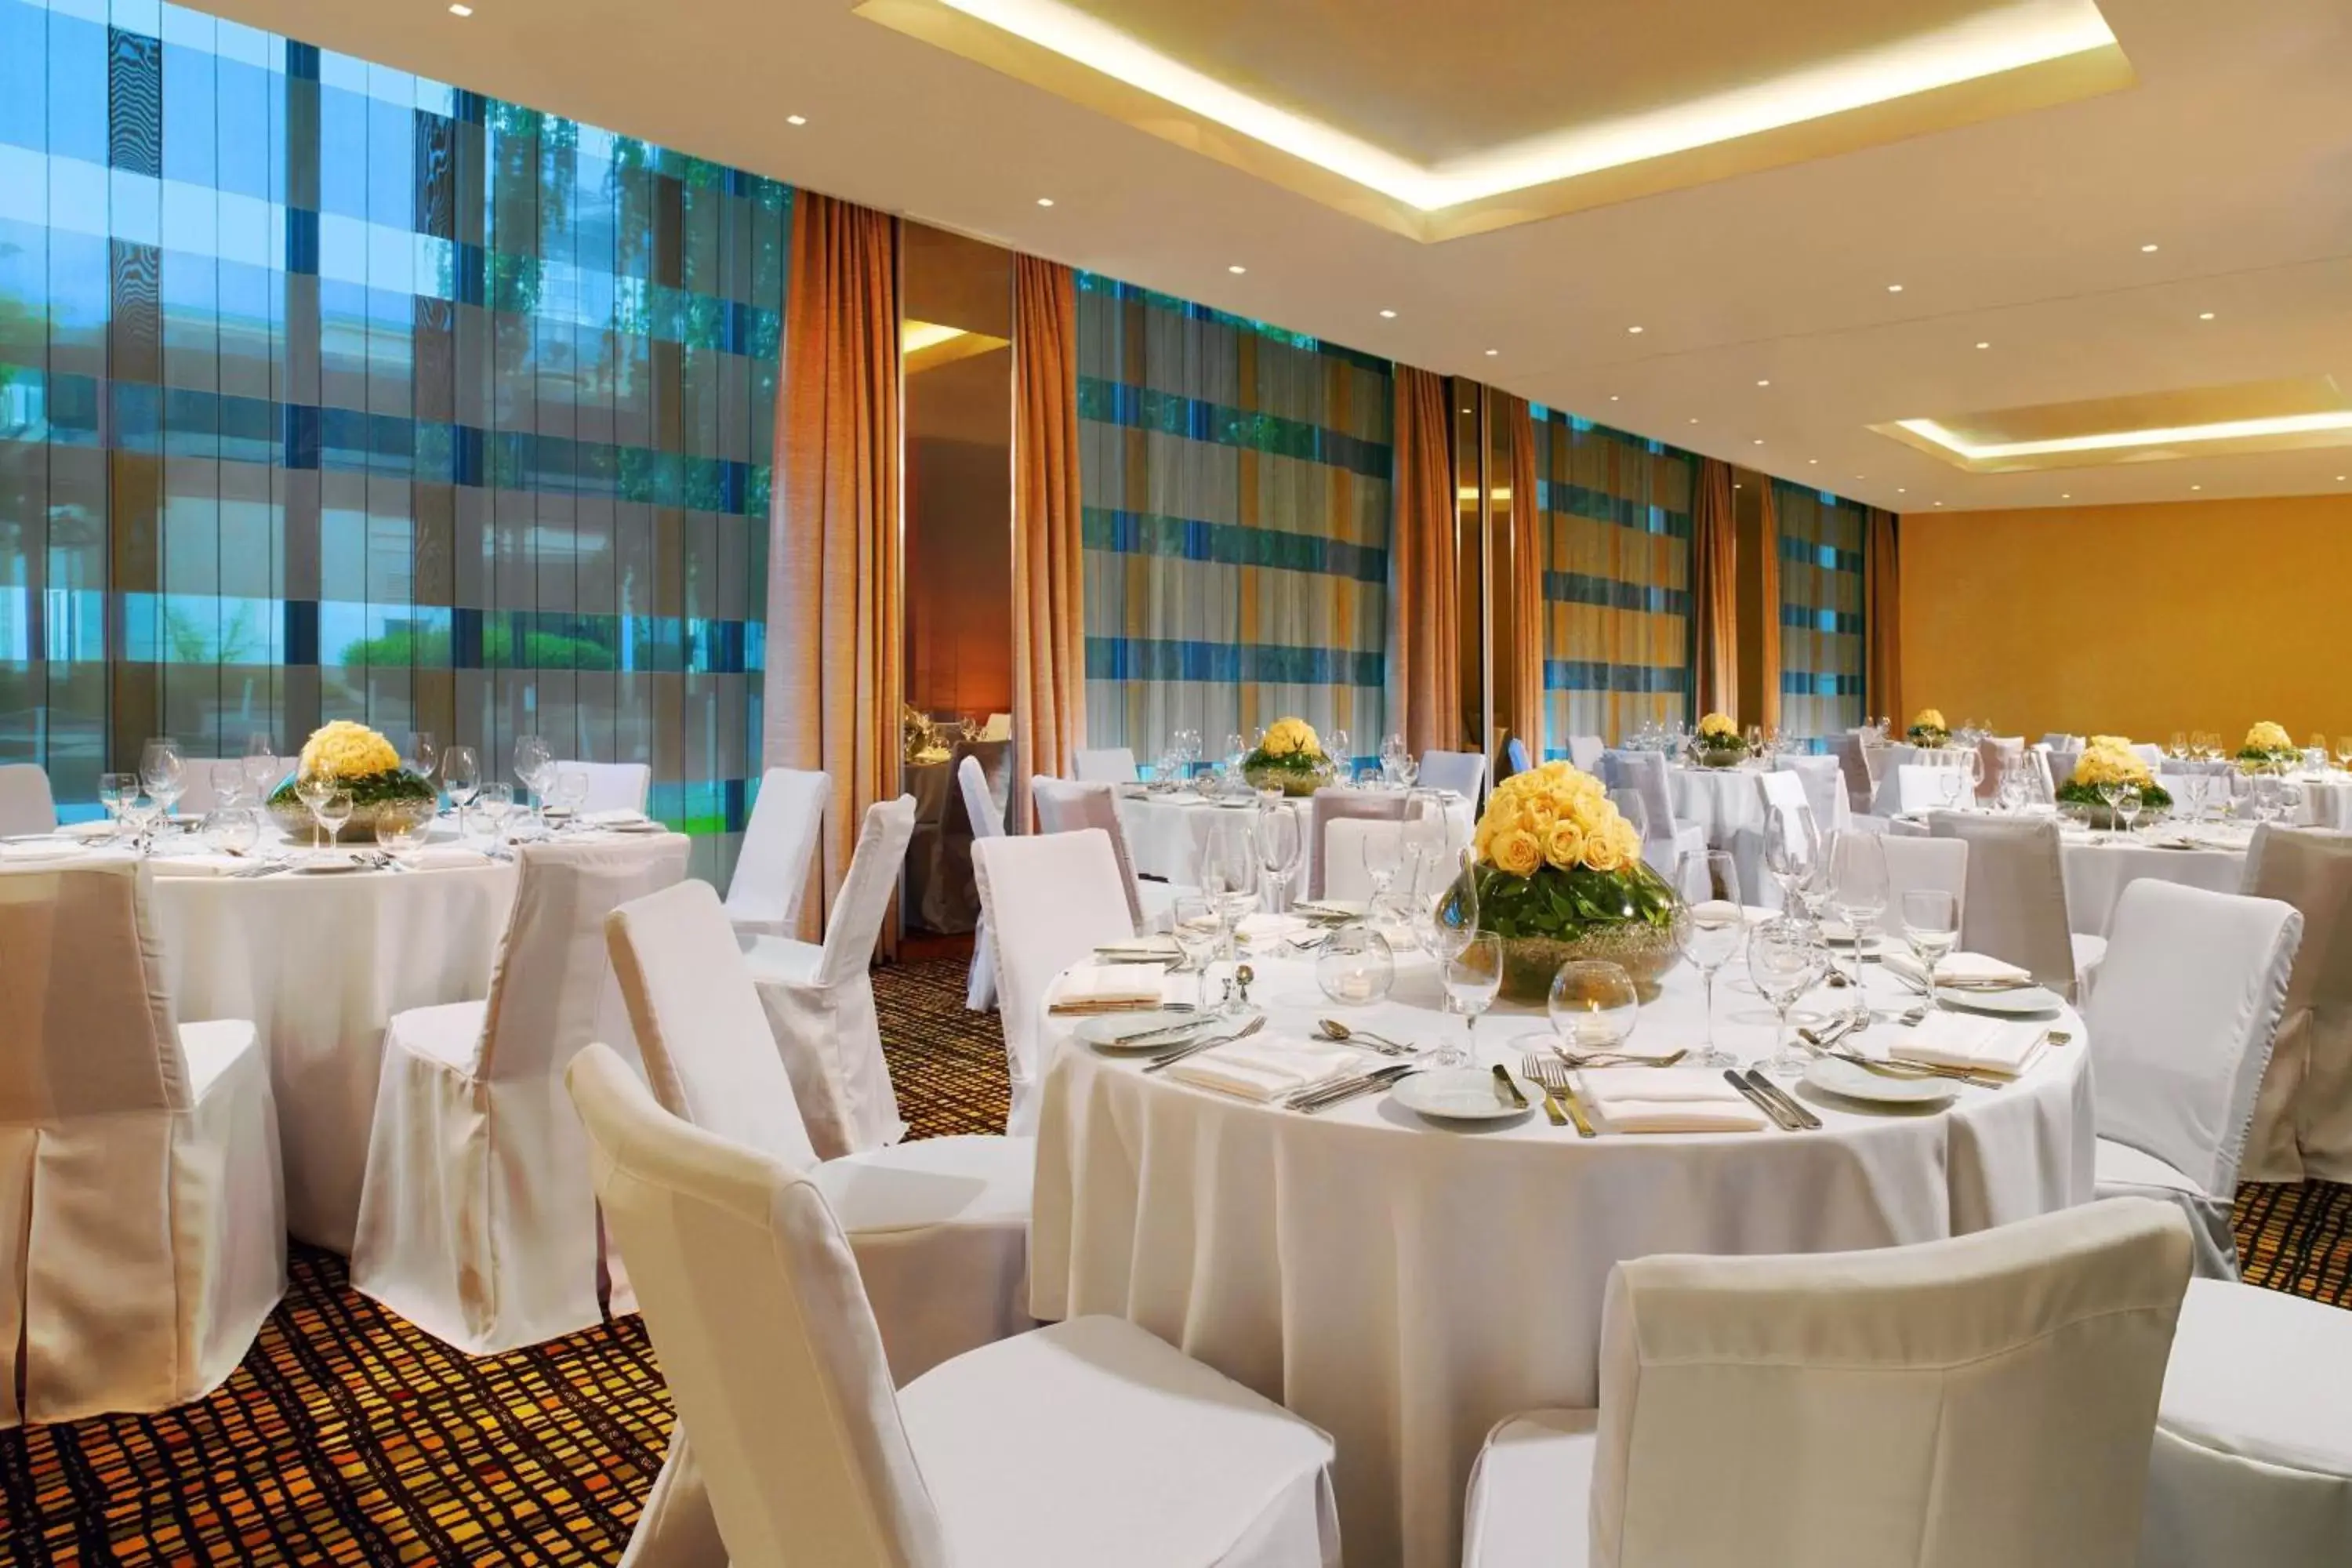 Meeting/conference room, Banquet Facilities in Sheraton Essen Hotel